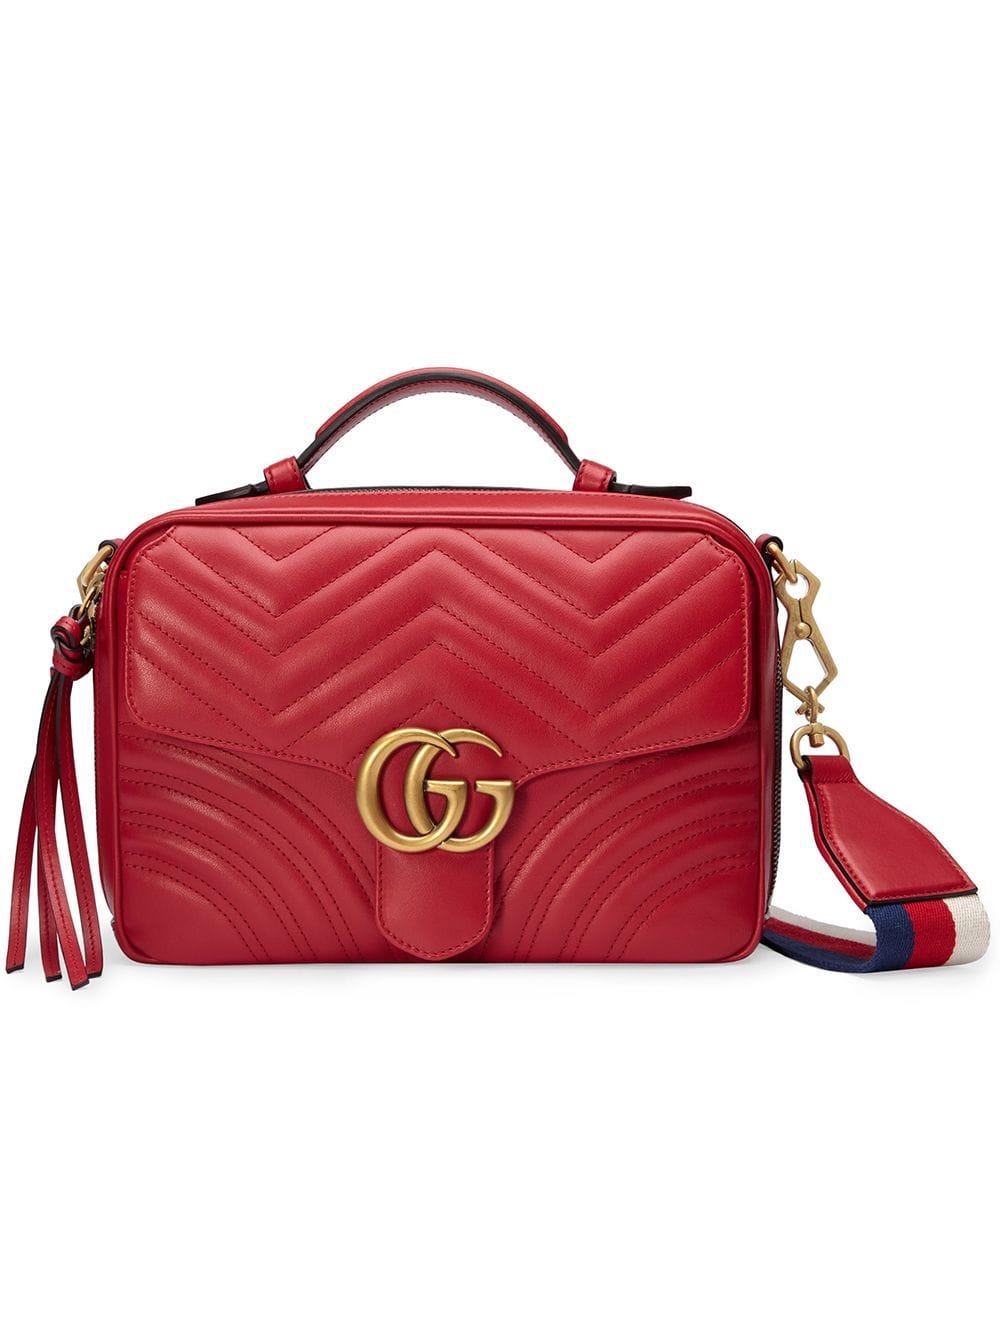 Gucci Synthetic Red GG Marmont Stripe Shoulder Bag - Lyst